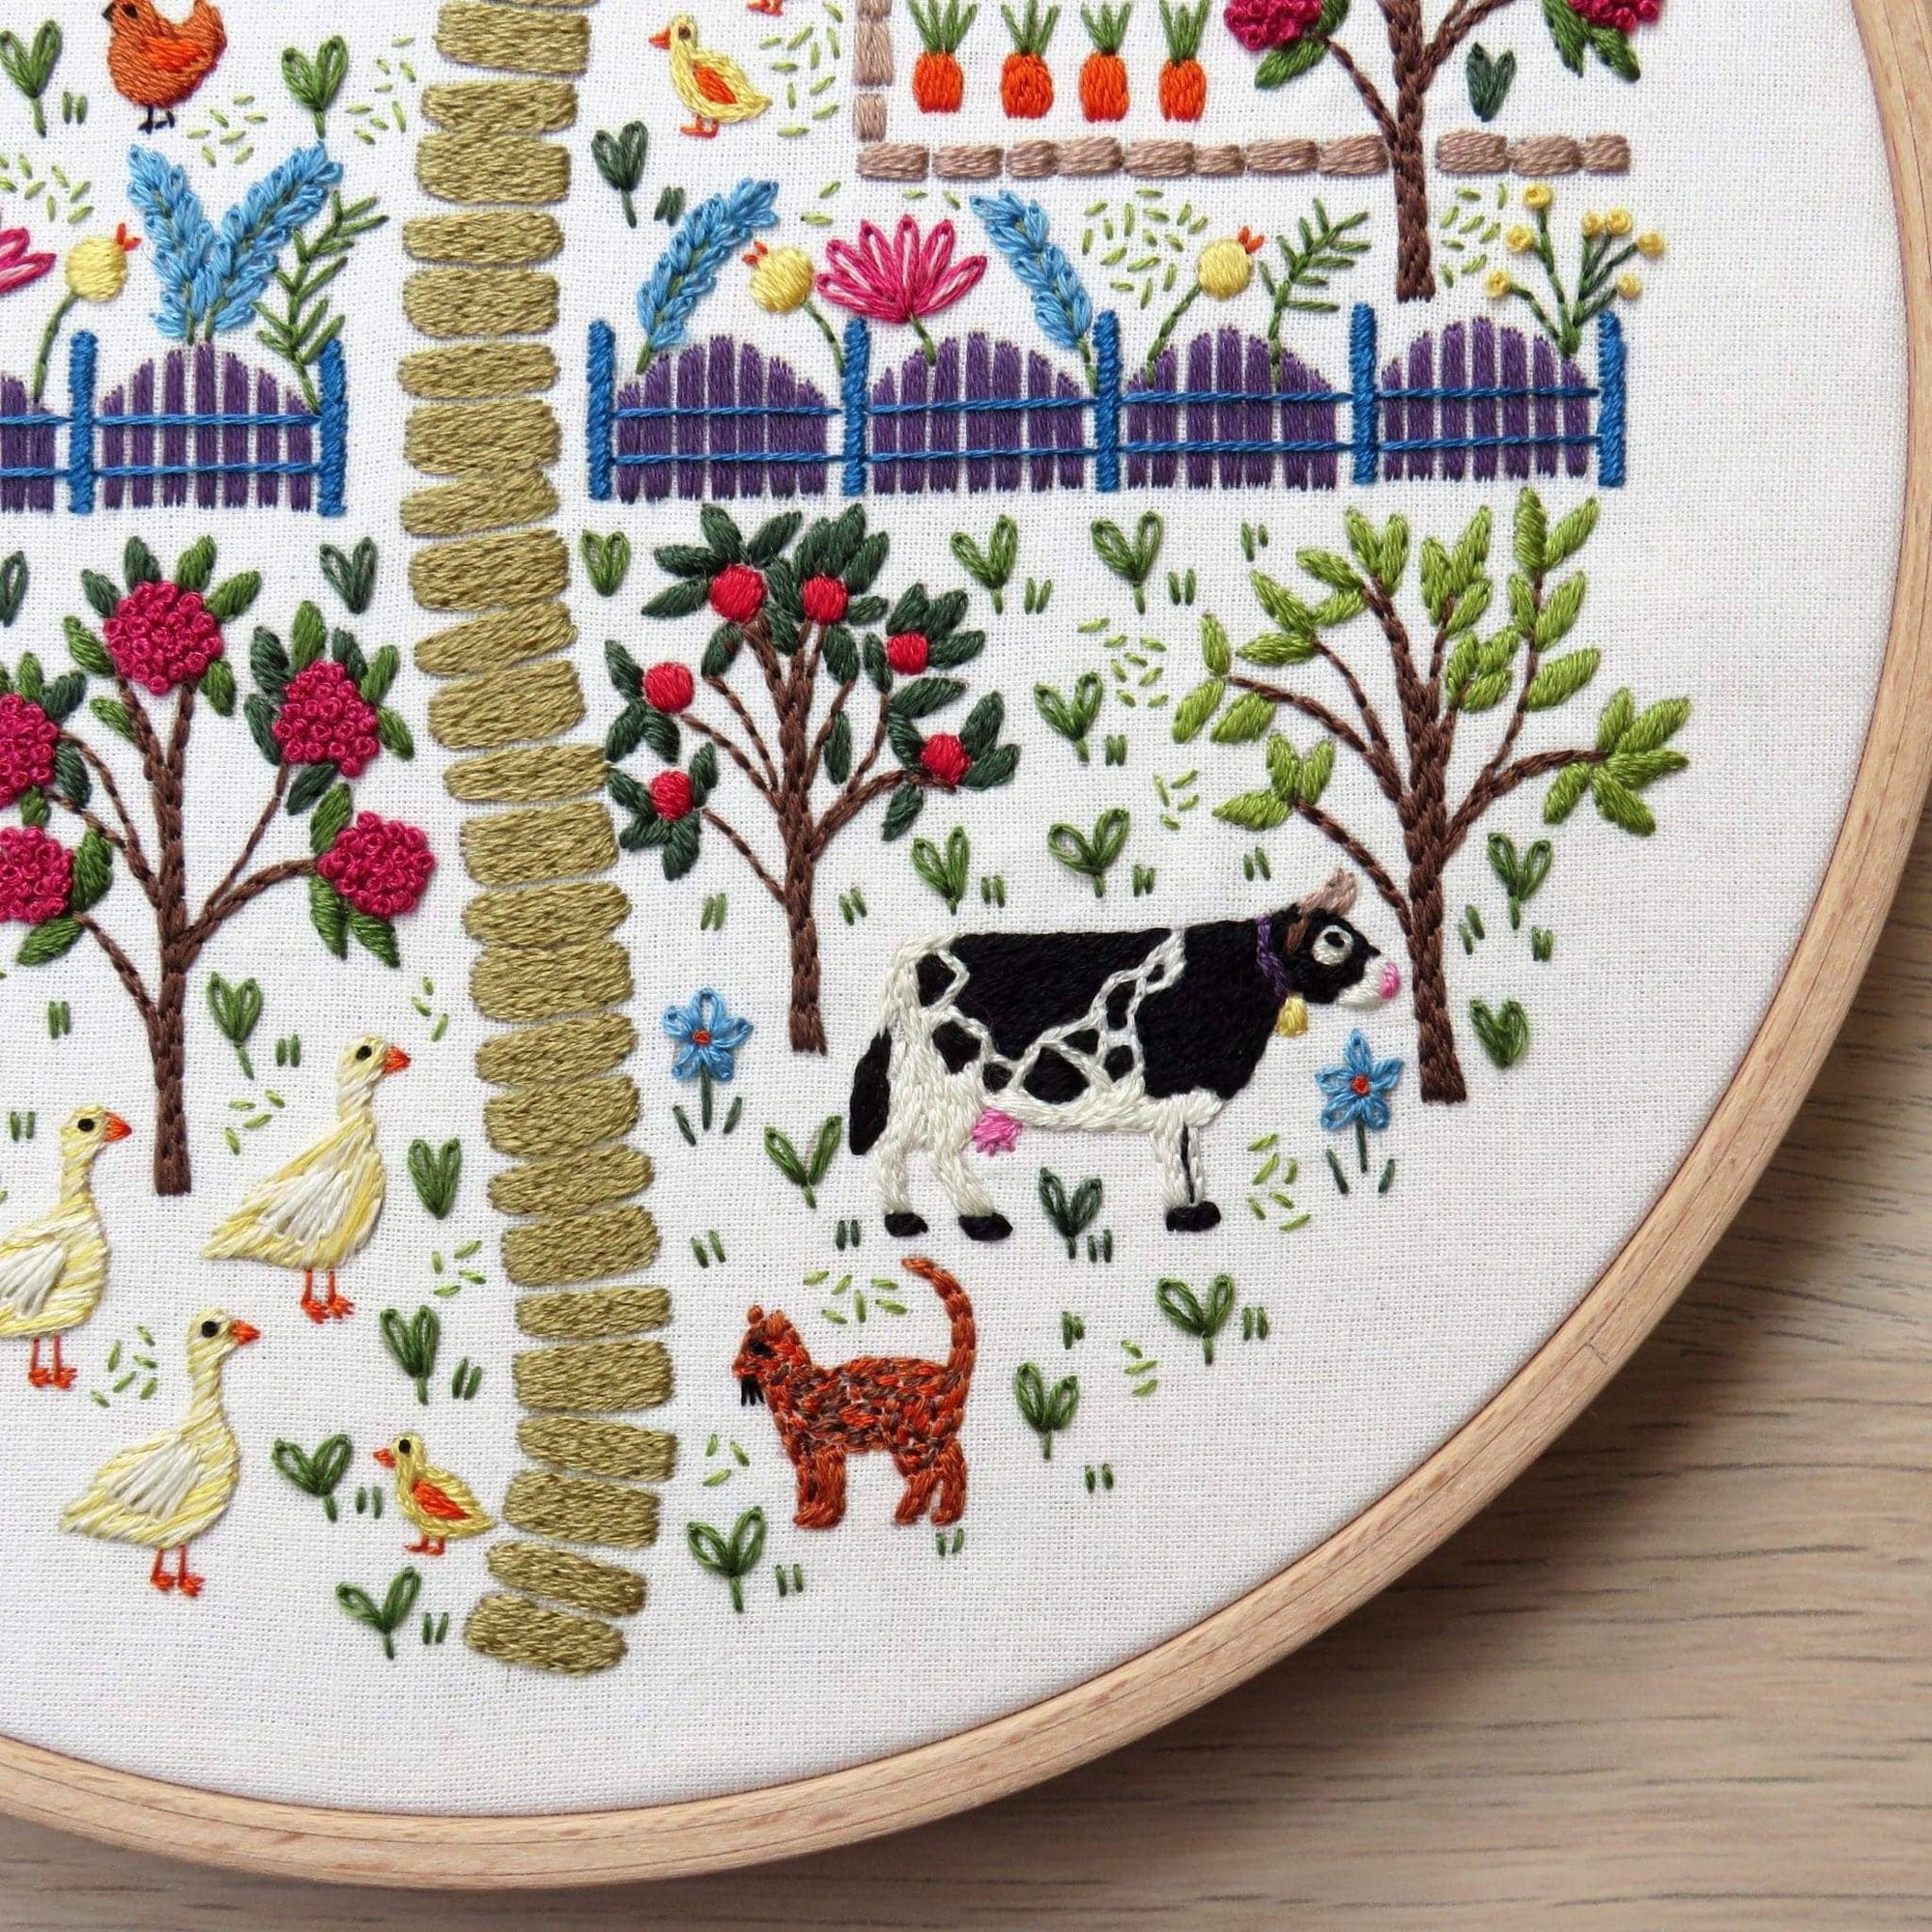 The Homestead Hand Embroidery PDF Pattern , PDF Download , StitchDoodles , bird embroidery, Embroidery, embroidery hoop, embroidery hoop kit, embroidery kits for beginners, embroidery pattern, garden embroidery, hand embroidery, hand embroidery fabric, hand embroidery seat frame, nurge embroidery hoop, PDF pattern, Printed Pattern, unique embroidery kits , StitchDoodles , shop.stitchdoodles.com